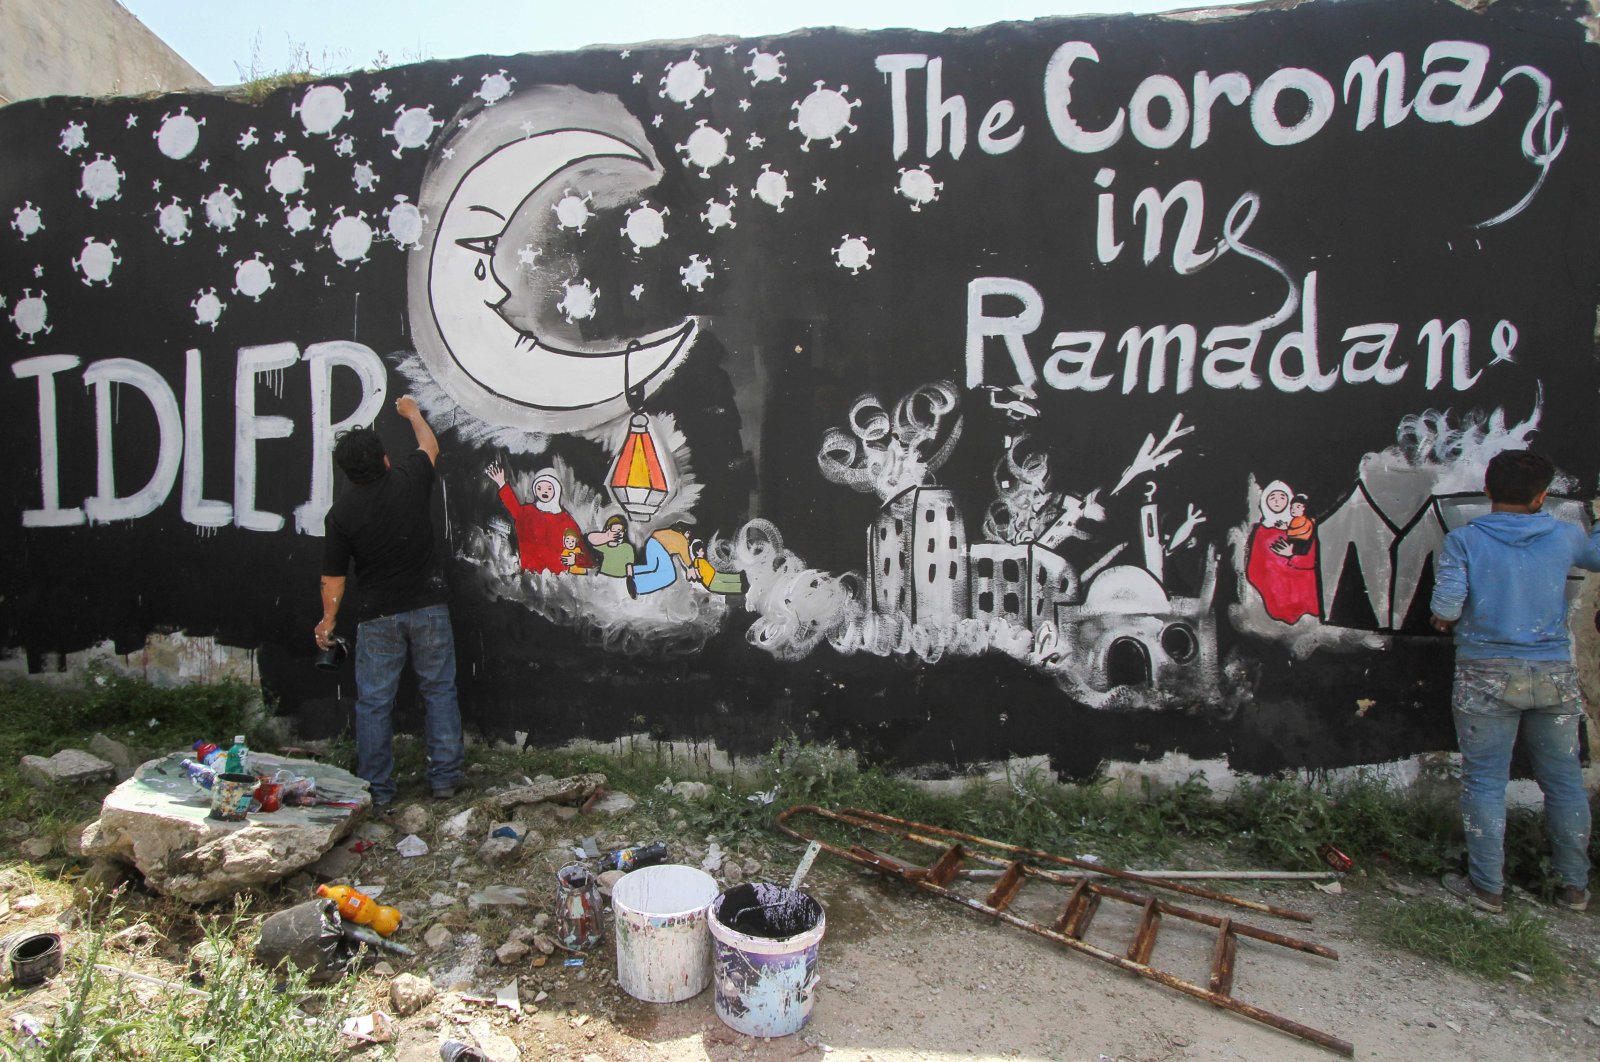 Syrian artist Aziz al-Asmar and his assistant Bachar Hamdoun paint a mural depicting the situation of displaced Syrians in camps amid the COVID-19 pandemic ahead of the holy fasting month of Ramadan, in the town of Binnish in Syria's northwestern Idlib province on April 23, 2020. (AFP Photo)